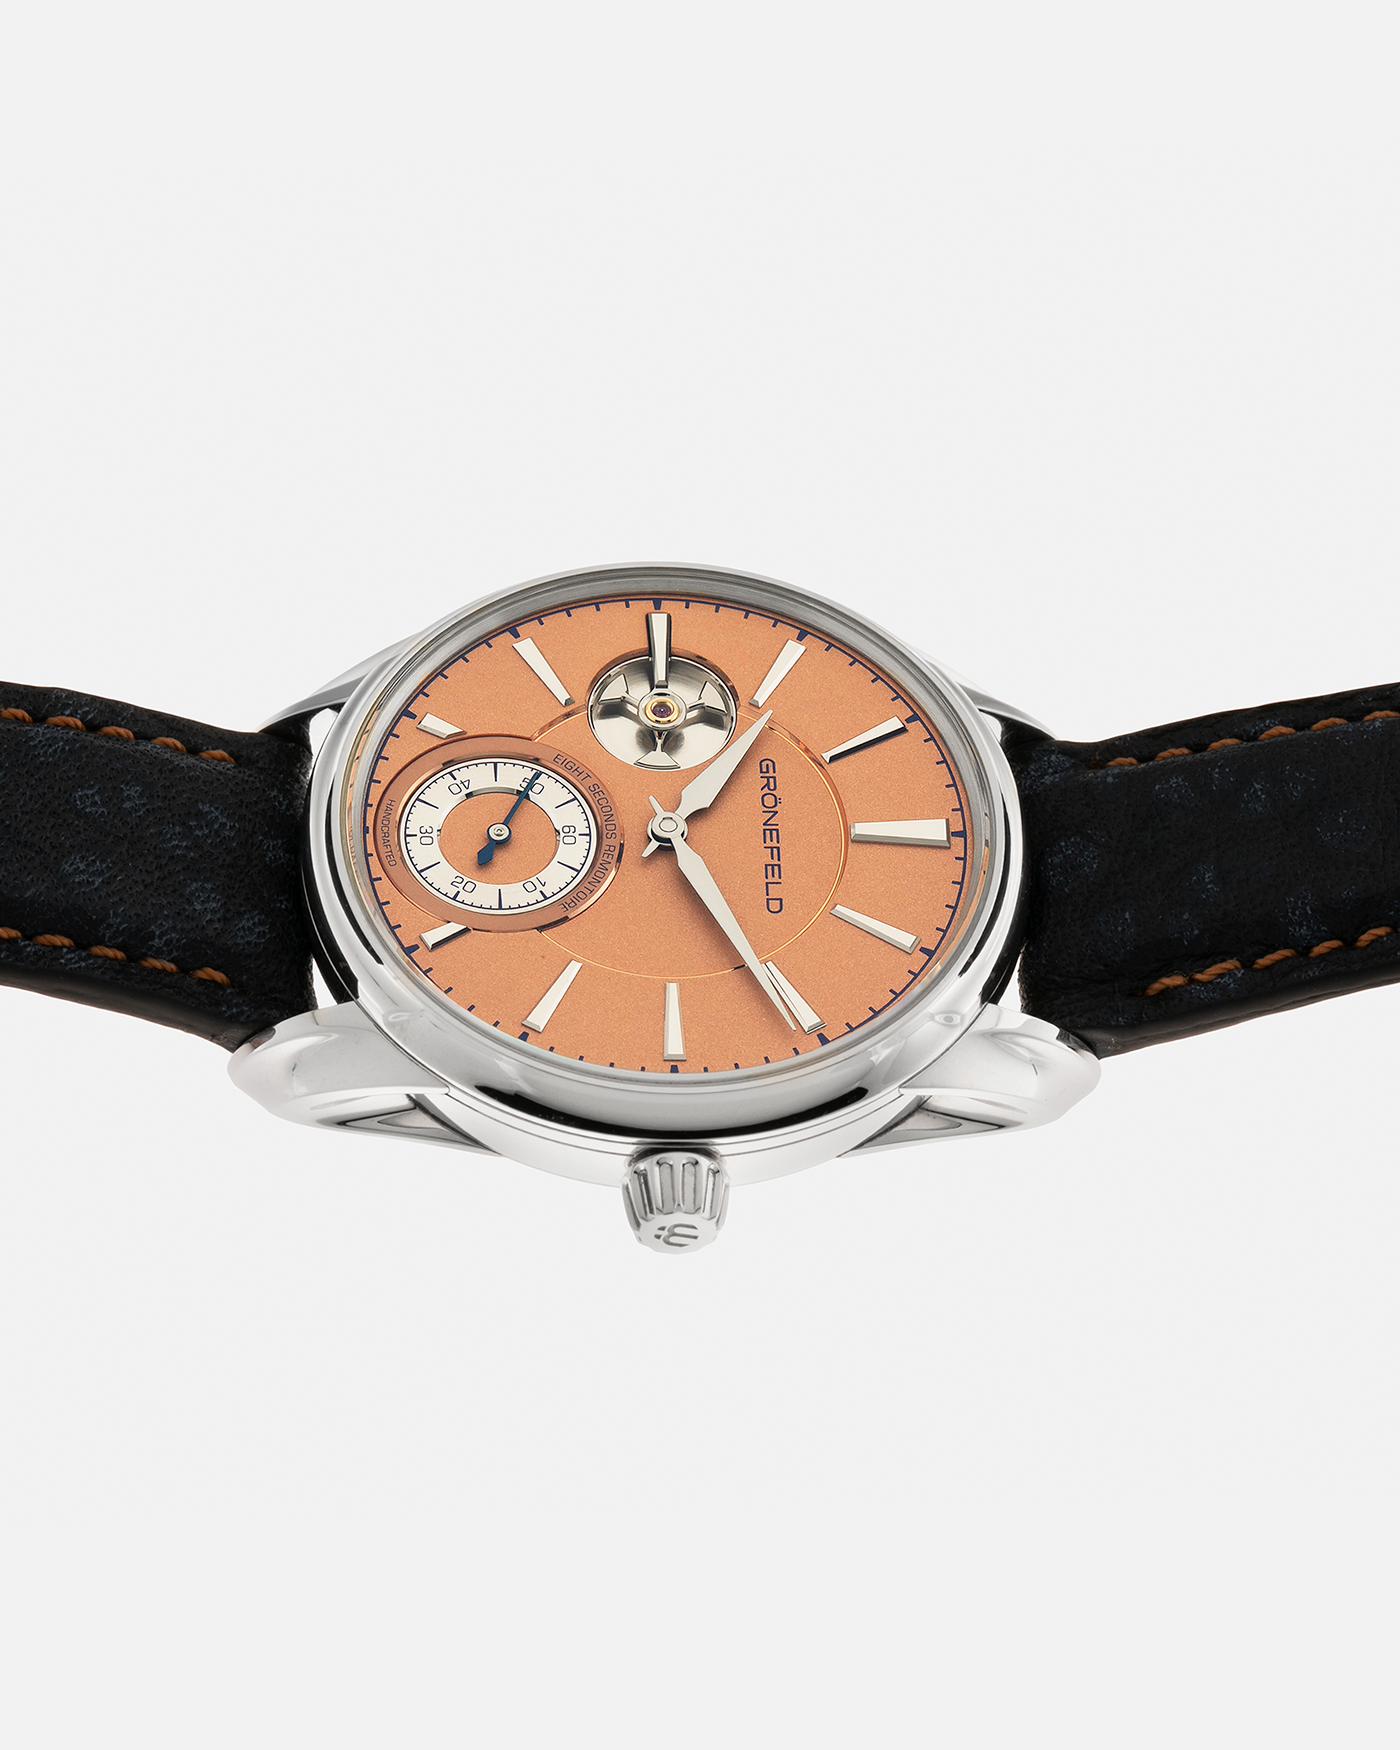 Brand: Grönefeld Year: XXXX Model: 1941 Remontoire ‘Salmon’ Material: Stainless Steel Movement: Grönefeld Cal. G-05, Manual-Winding Case Dimensions: 39.5mm x  10.5mm Lug Width: 20mm Strap: Grönefeld Blue Ostrich / Dutch Orange Leather Strap with Signed Stainless Steel 916L Tang Buckle